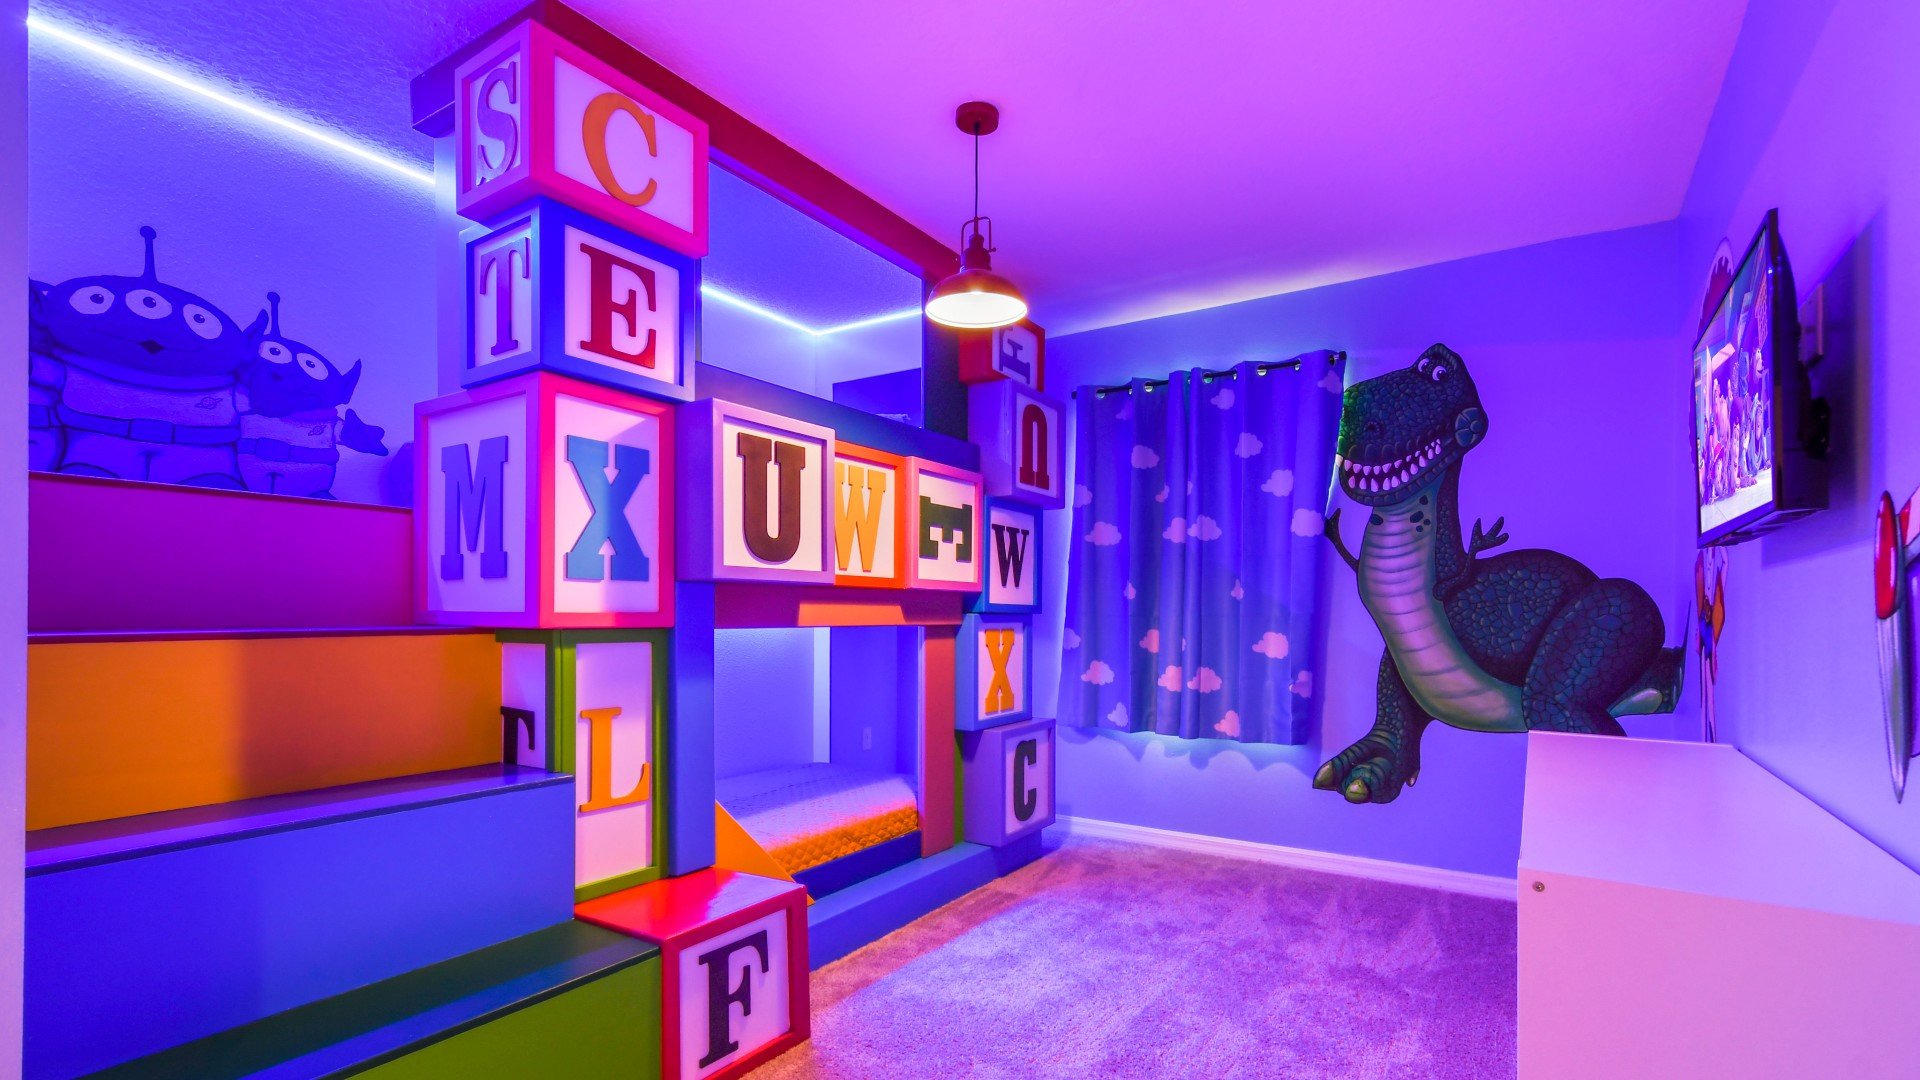 Kids will love the upstairs bedroom with a cool Toy Story theme